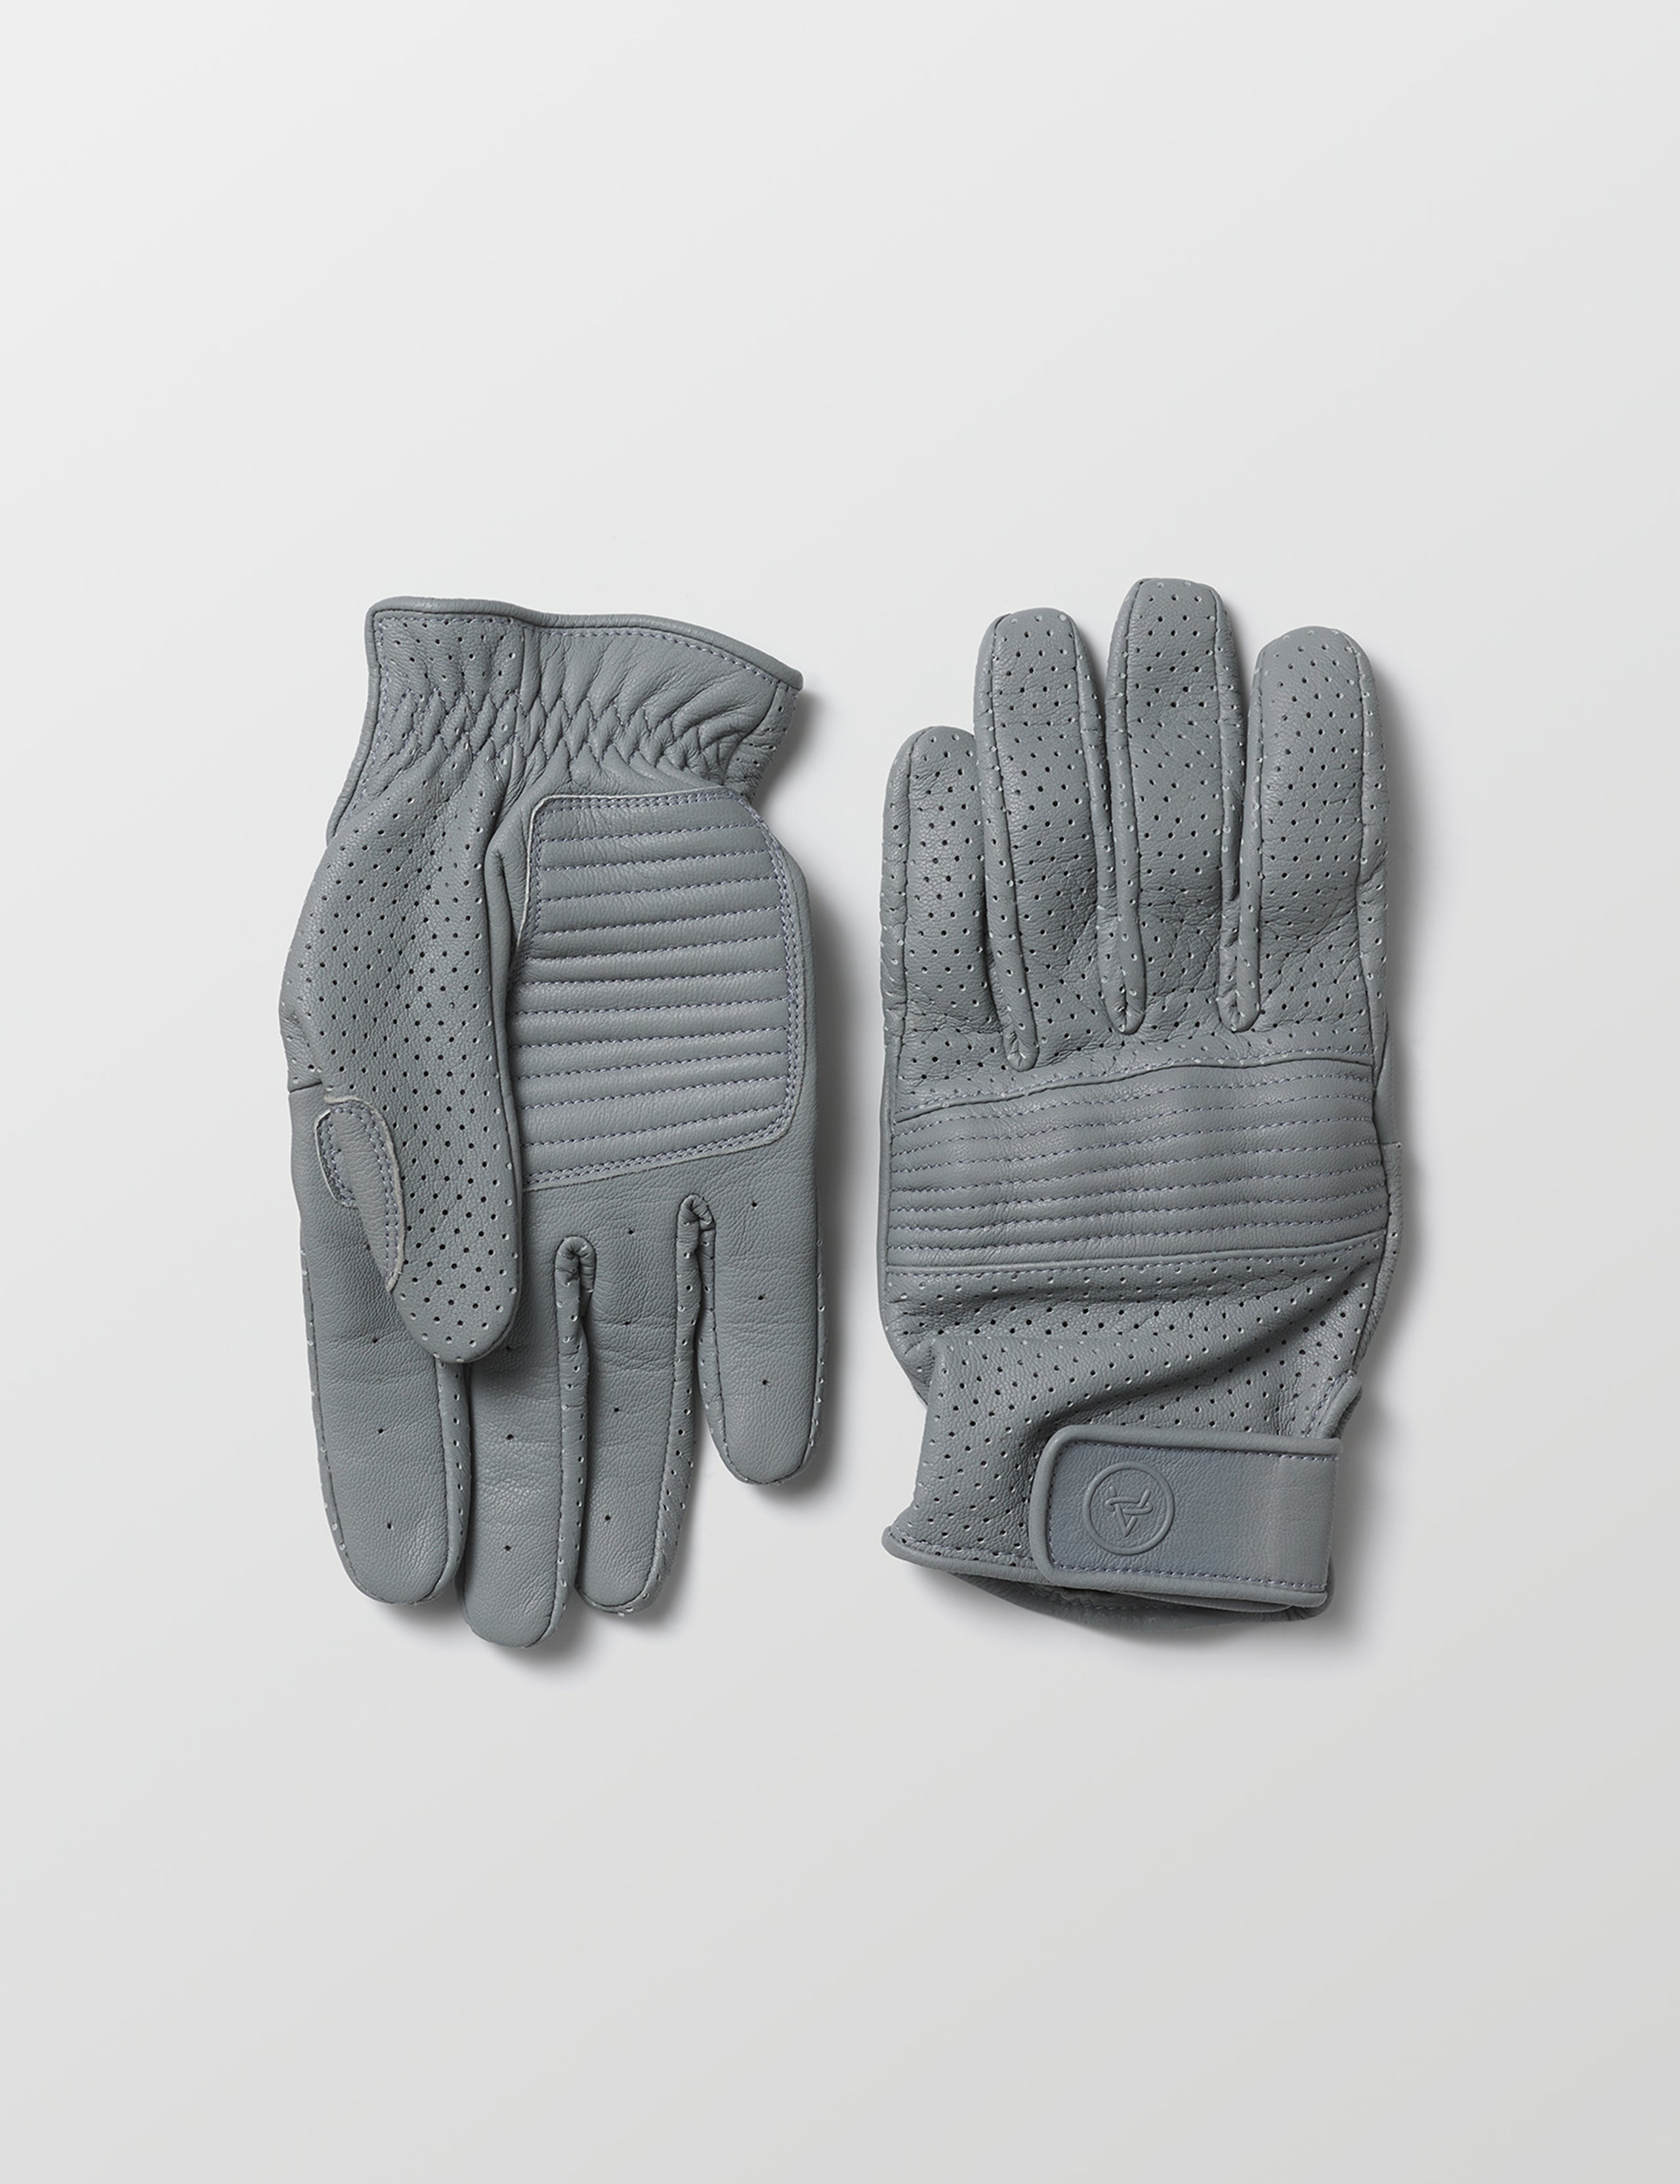 Pair of grey motorcycle gloves from AETHER Apparel